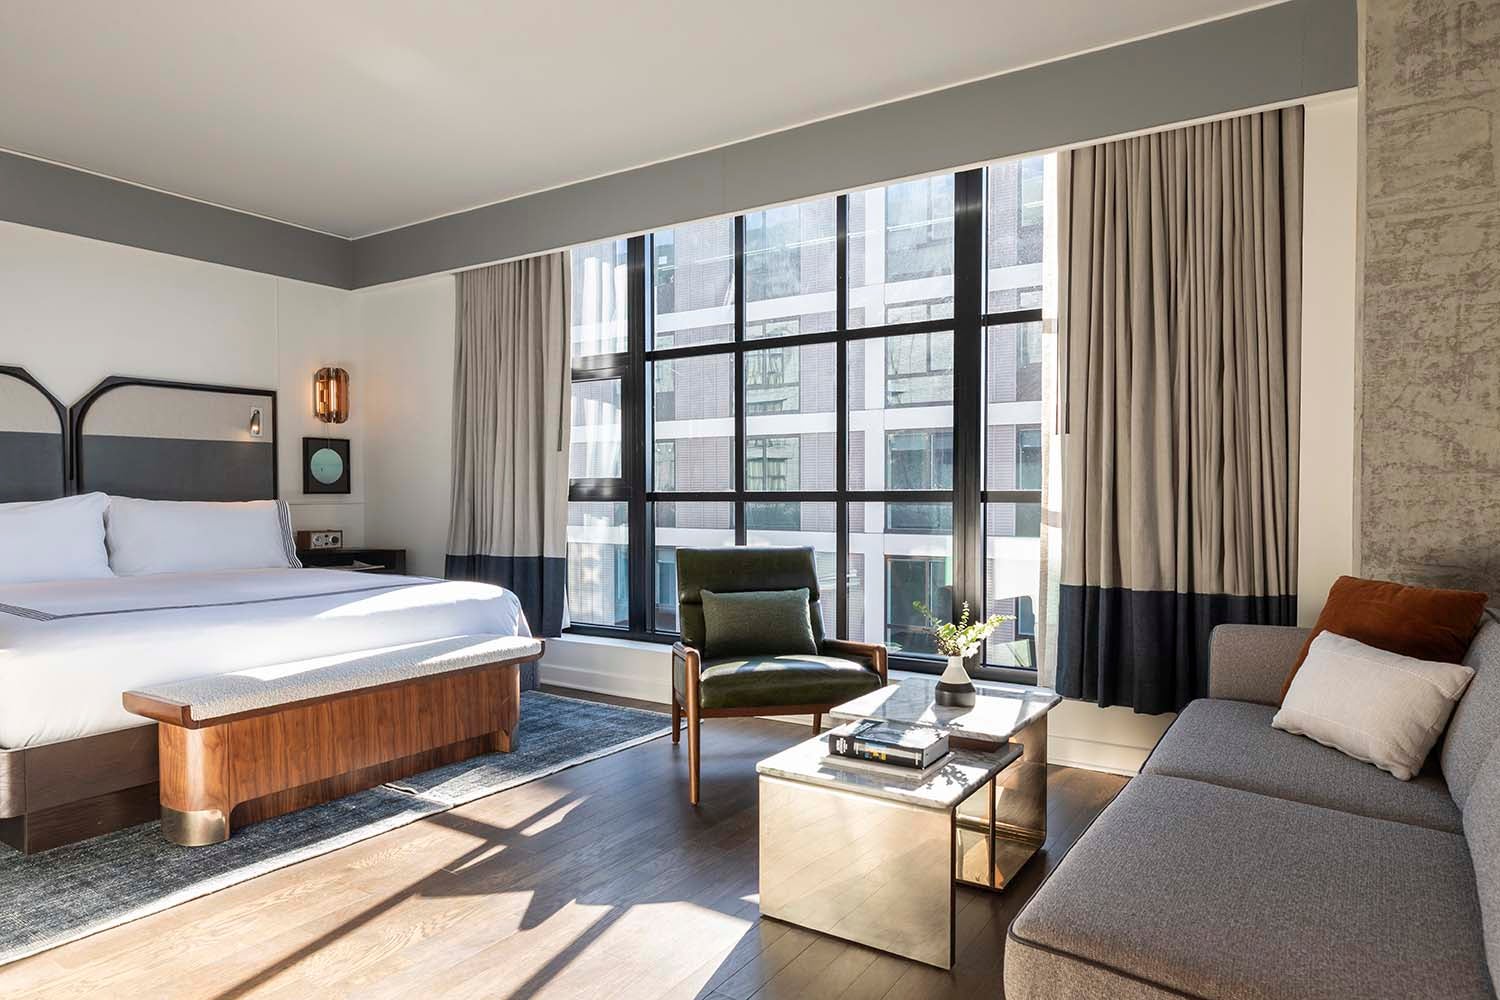 Style Meets Sophistication At This Trendy Washington D.C. Hotel